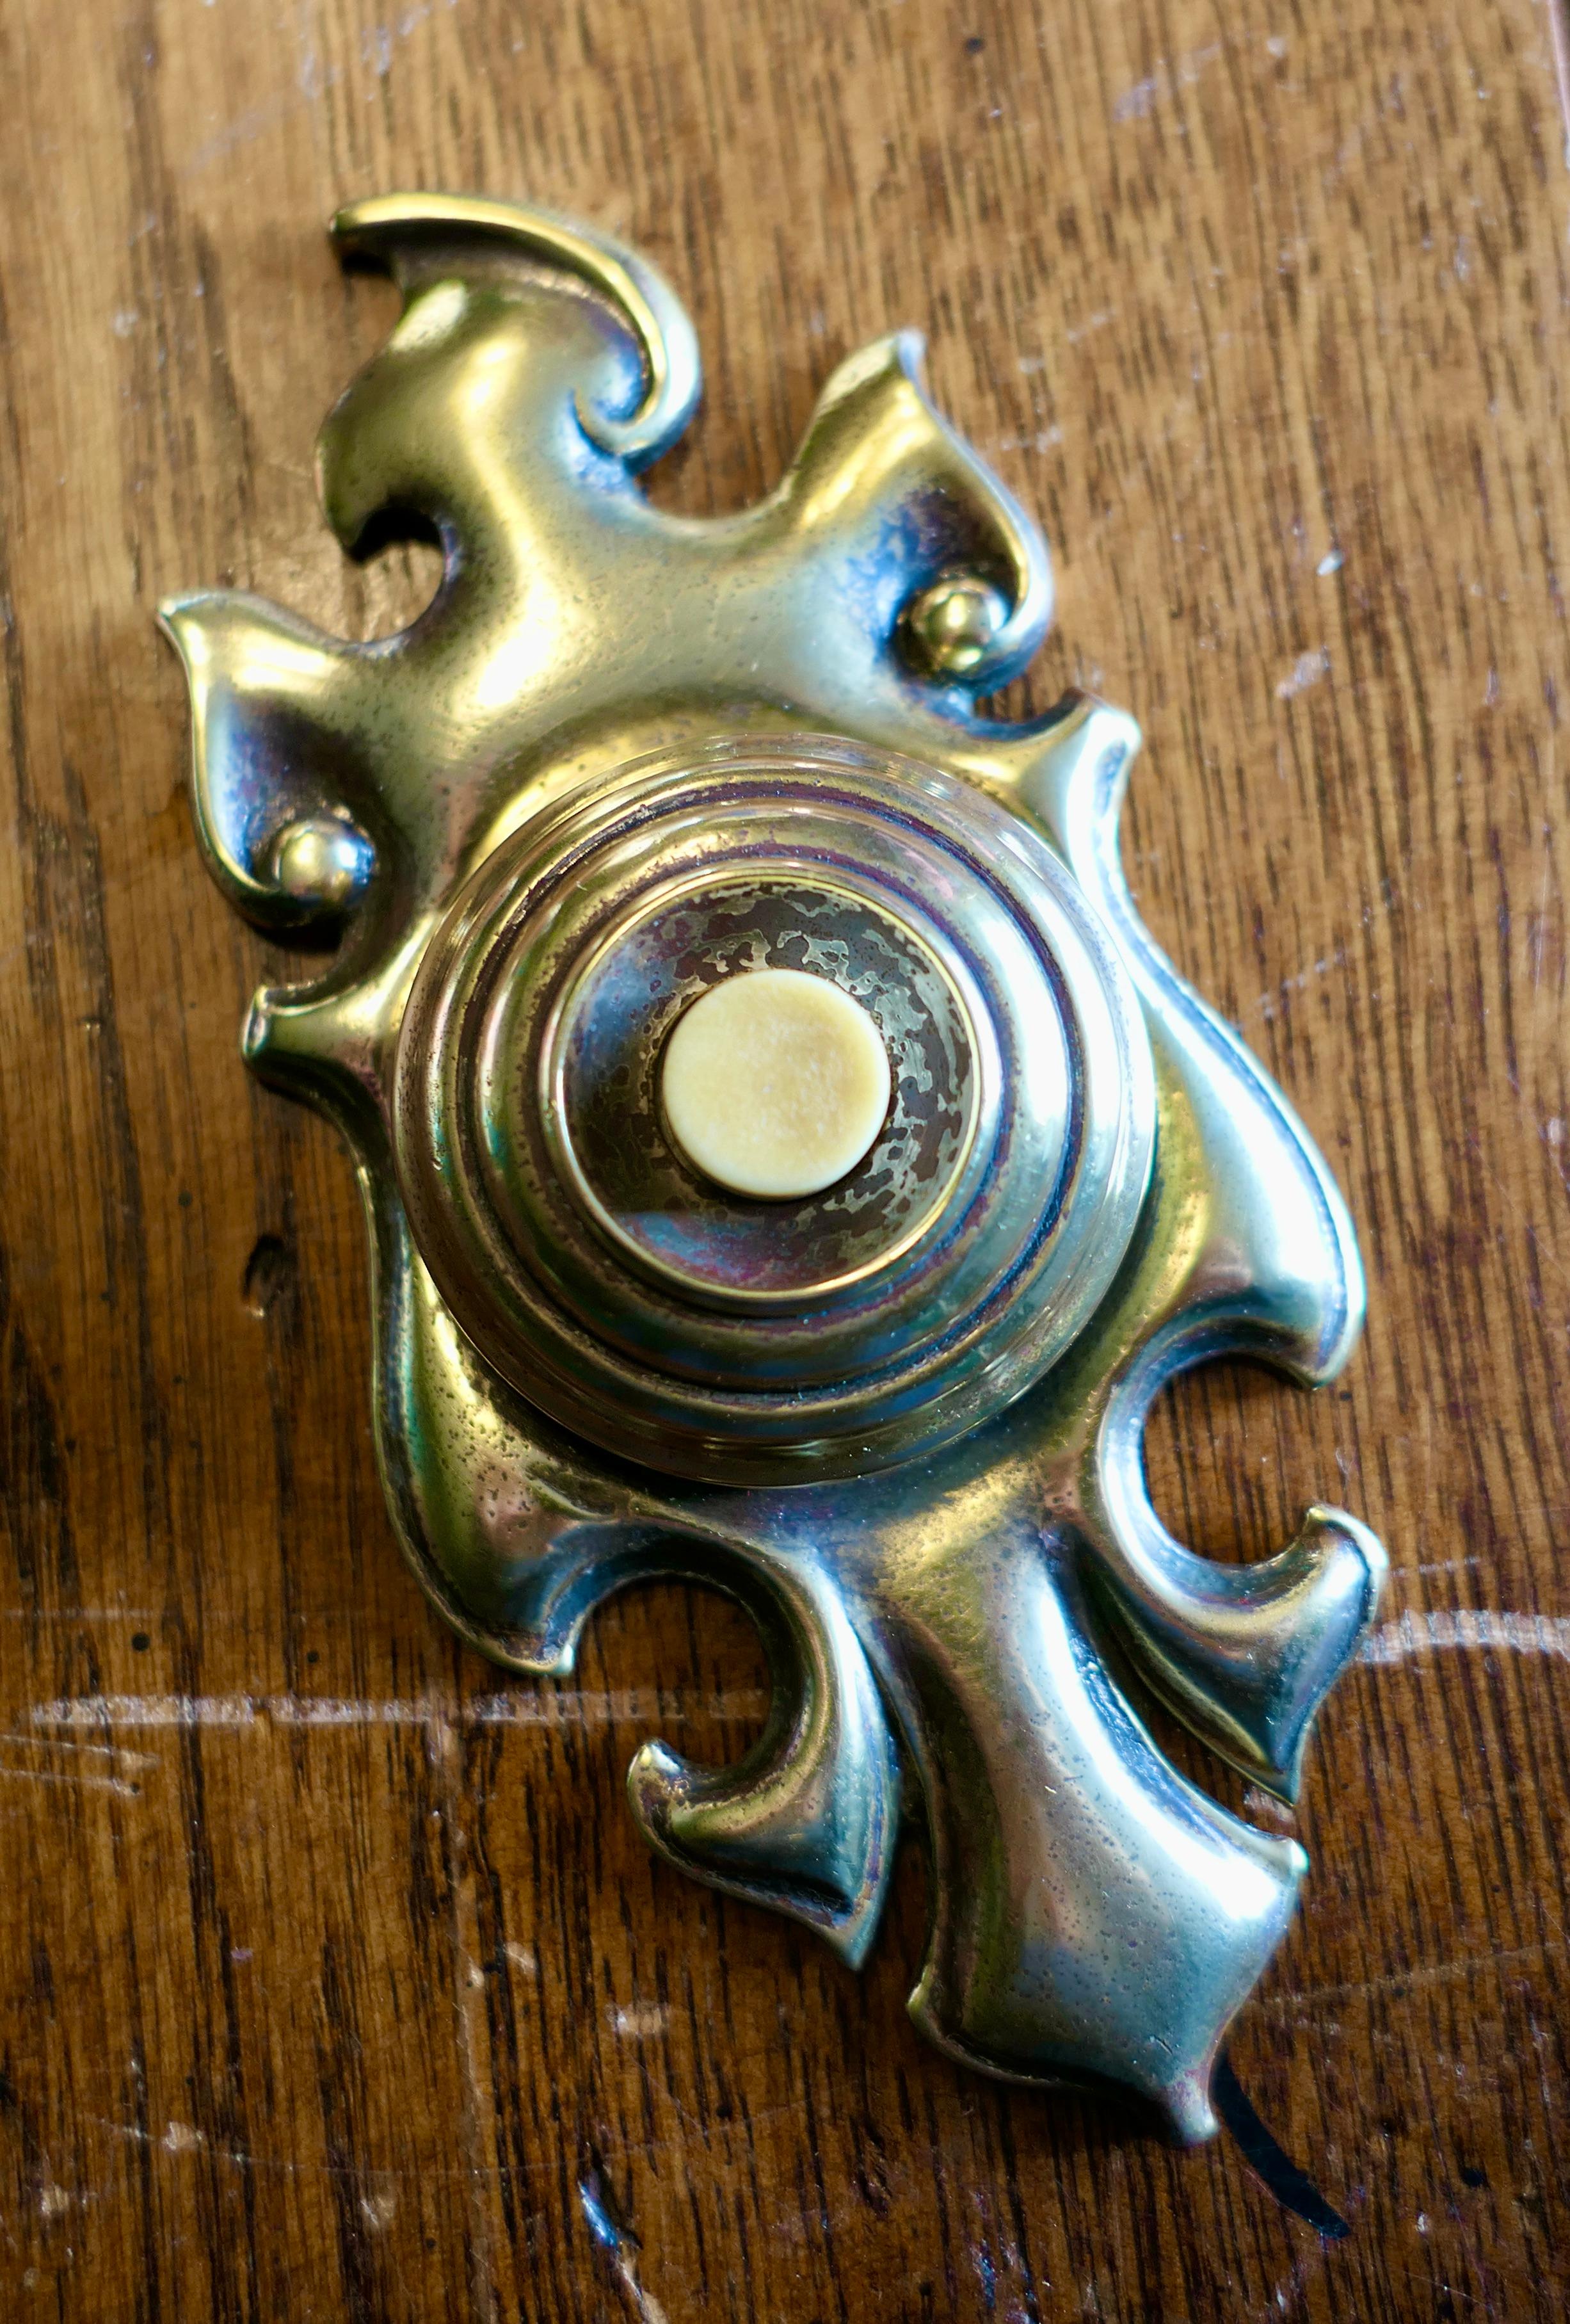 Superb Art Nouveau brass bell push

This is a superb looking piece, it has a 19th century registration marks on the back.
The condition both inside and out is very good and the bell push could be connected either to a battery or with the use of